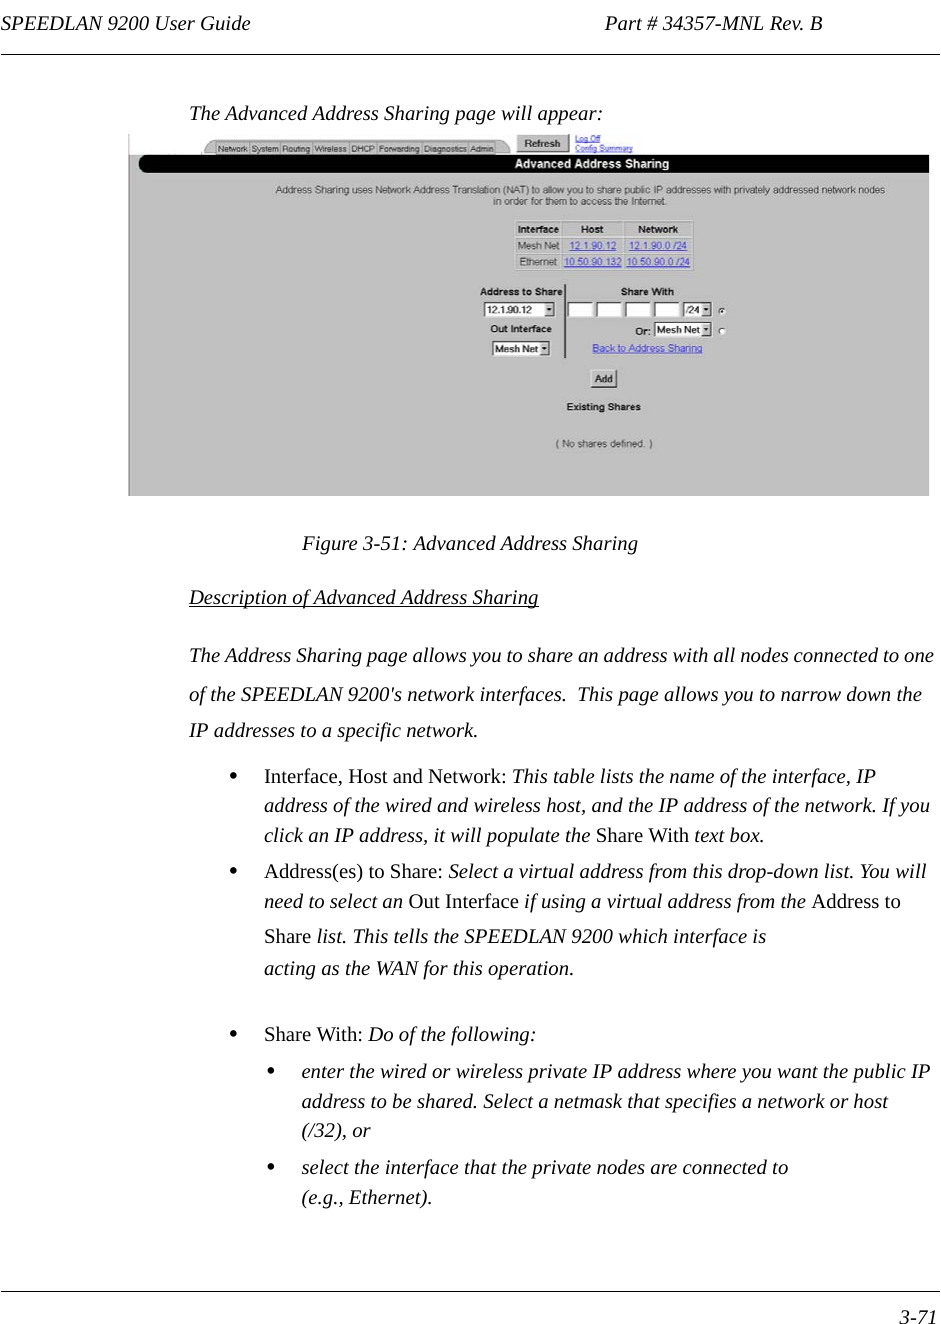 SPEEDLAN 9200 User Guide                                                                    Part # 34357-MNL Rev. B      3-71                                                                                                                                                              The Advanced Address Sharing page will appear: Figure 3-51: Advanced Address SharingDescription of Advanced Address SharingThe Address Sharing page allows you to share an address with all nodes connected to one of the SPEEDLAN 9200&apos;s network interfaces.  This page allows you to narrow down the IP addresses to a specific network.•Interface, Host and Network: This table lists the name of the interface, IP address of the wired and wireless host, and the IP address of the network. If you click an IP address, it will populate the Share With text box.•Address(es) to Share: Select a virtual address from this drop-down list. You will need to select an Out Interface if using a virtual address from the Address to Share list. This tells the SPEEDLAN 9200 which interface is acting as the WAN for this operation.•Share With: Do of the following:•enter the wired or wireless private IP address where you want the public IP address to be shared. Select a netmask that specifies a network or host(/32), or•select the interface that the private nodes are connected to(e.g., Ethernet). 